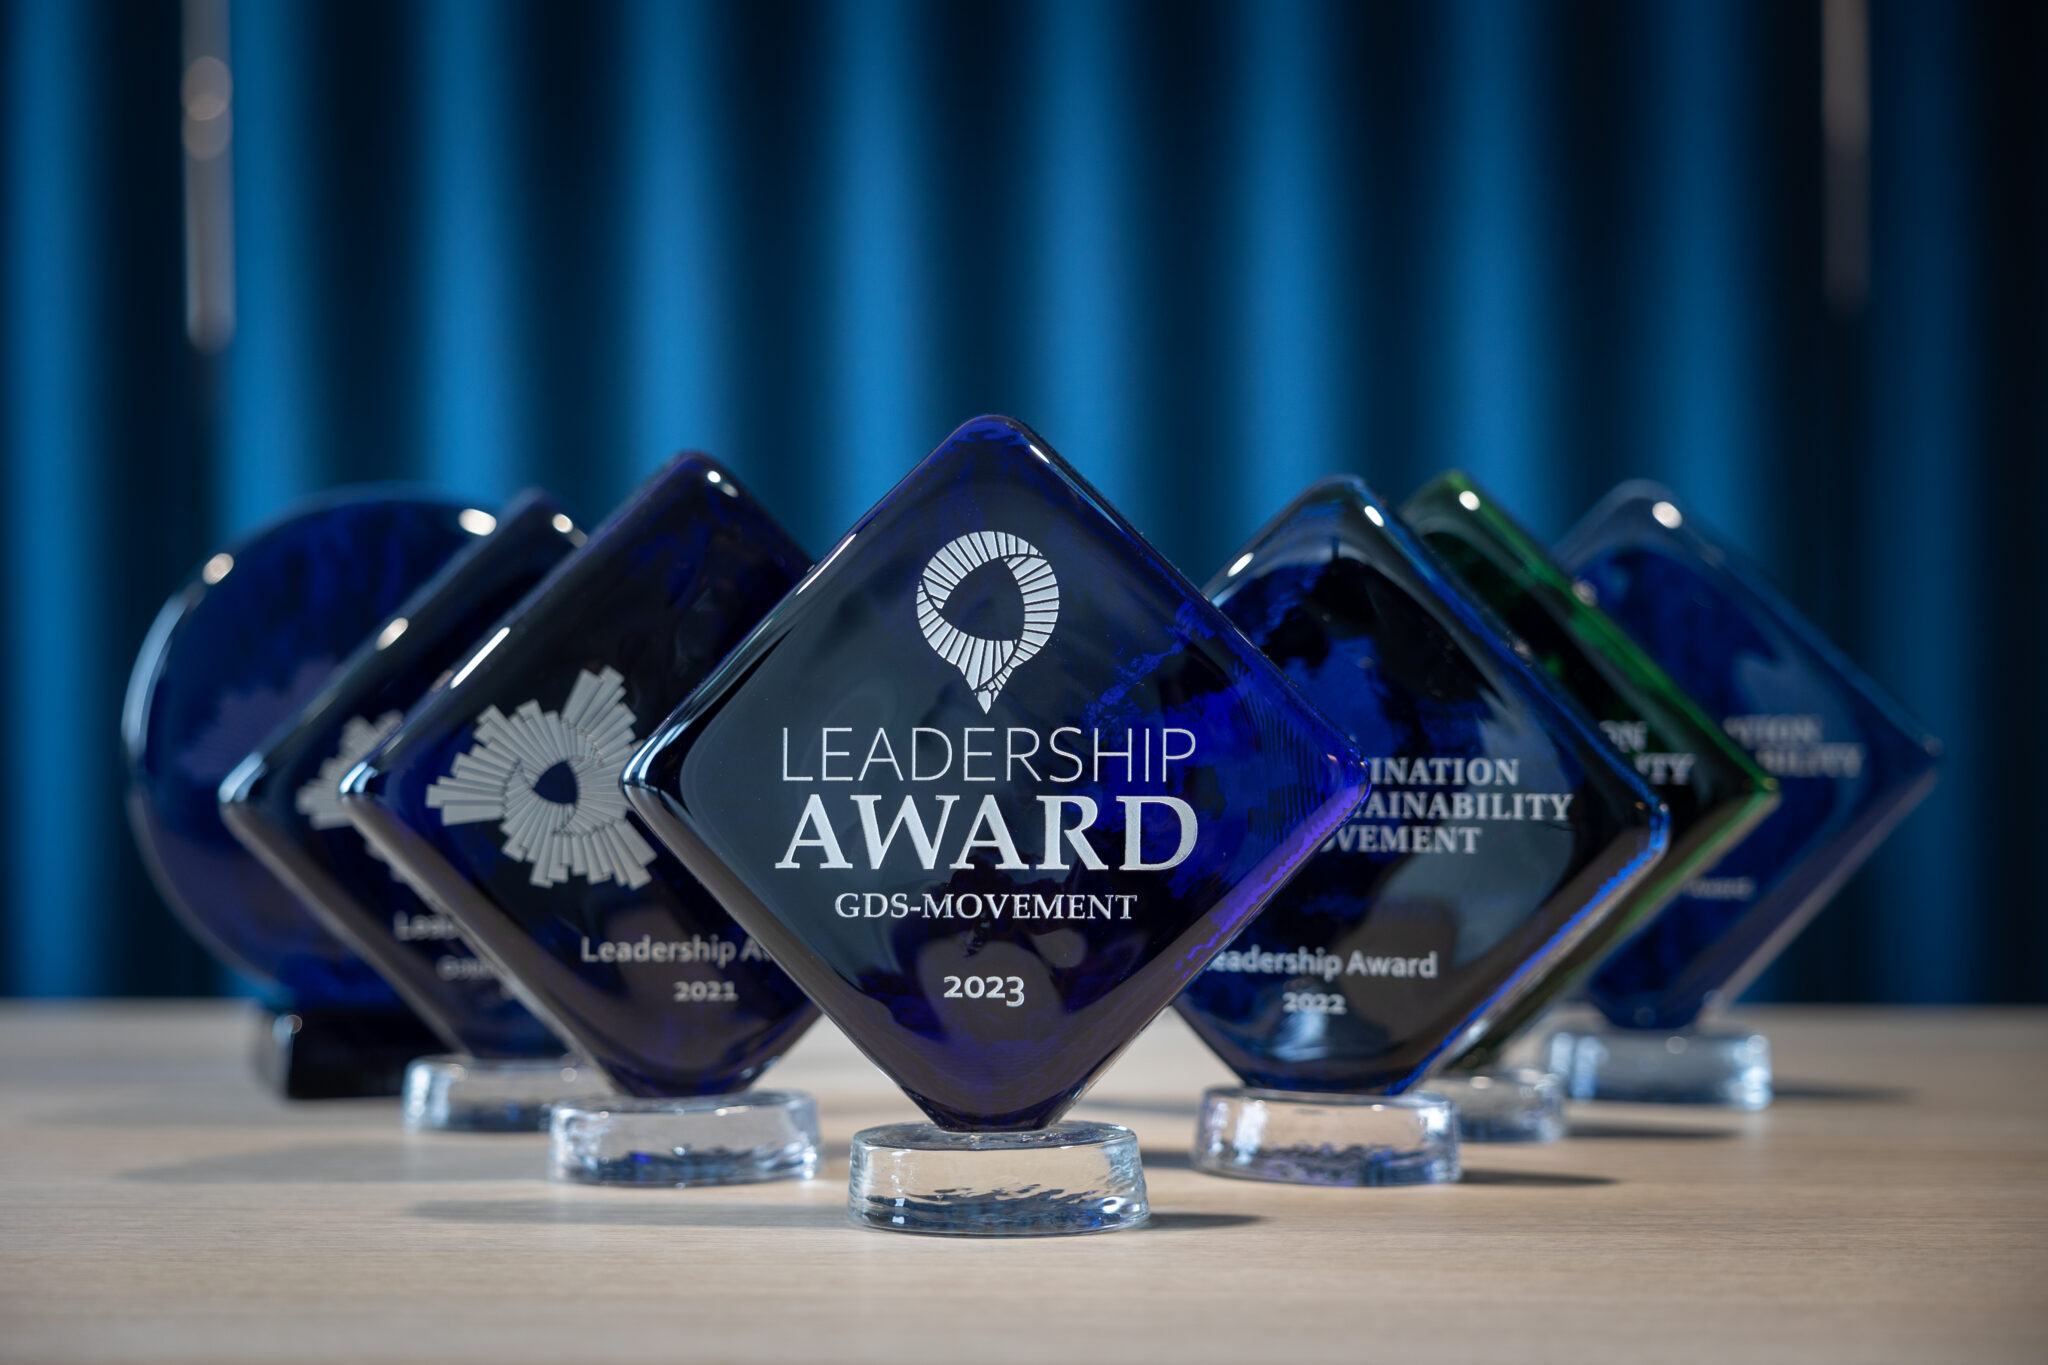 Leadership award trophies lined up in front of a blue background, with the most recent one from 2023 at the forefront.